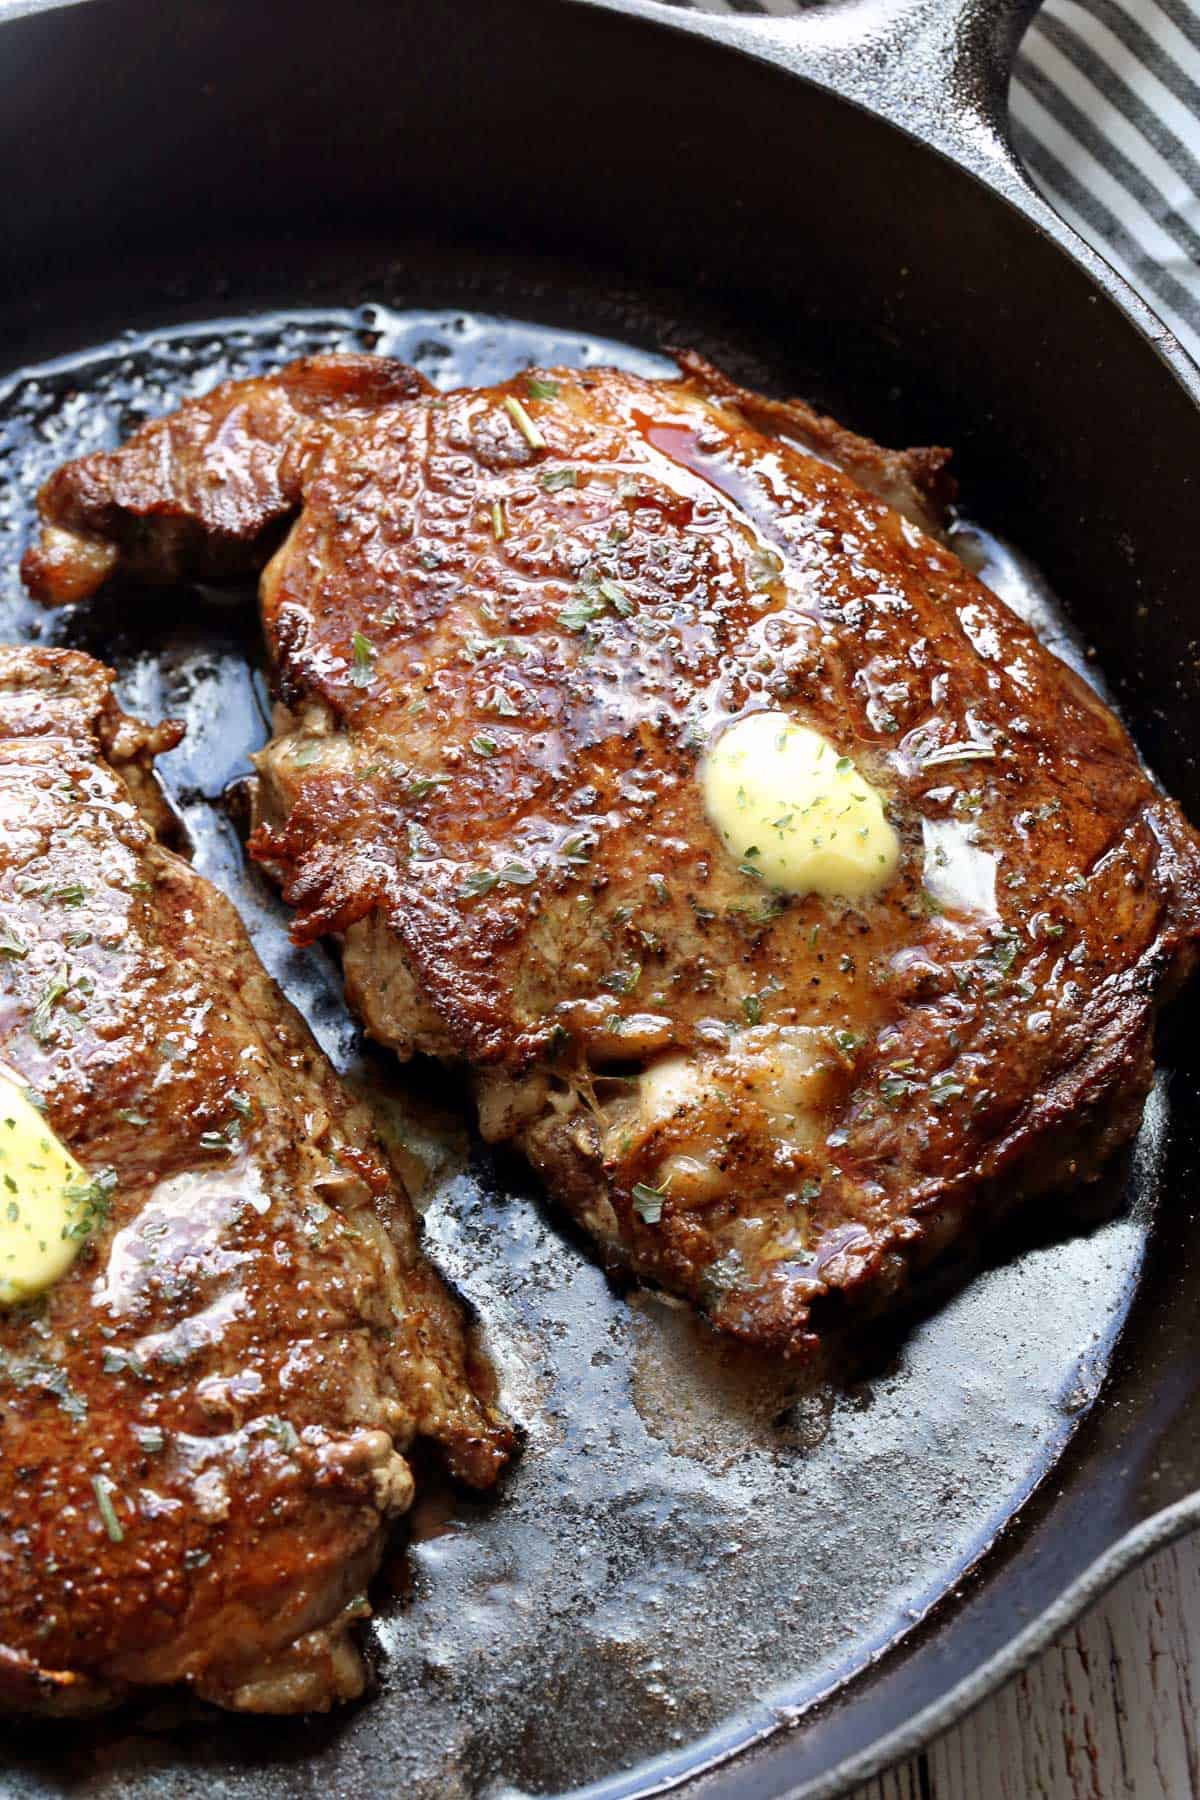 Two ribeye steaks topped with butter.